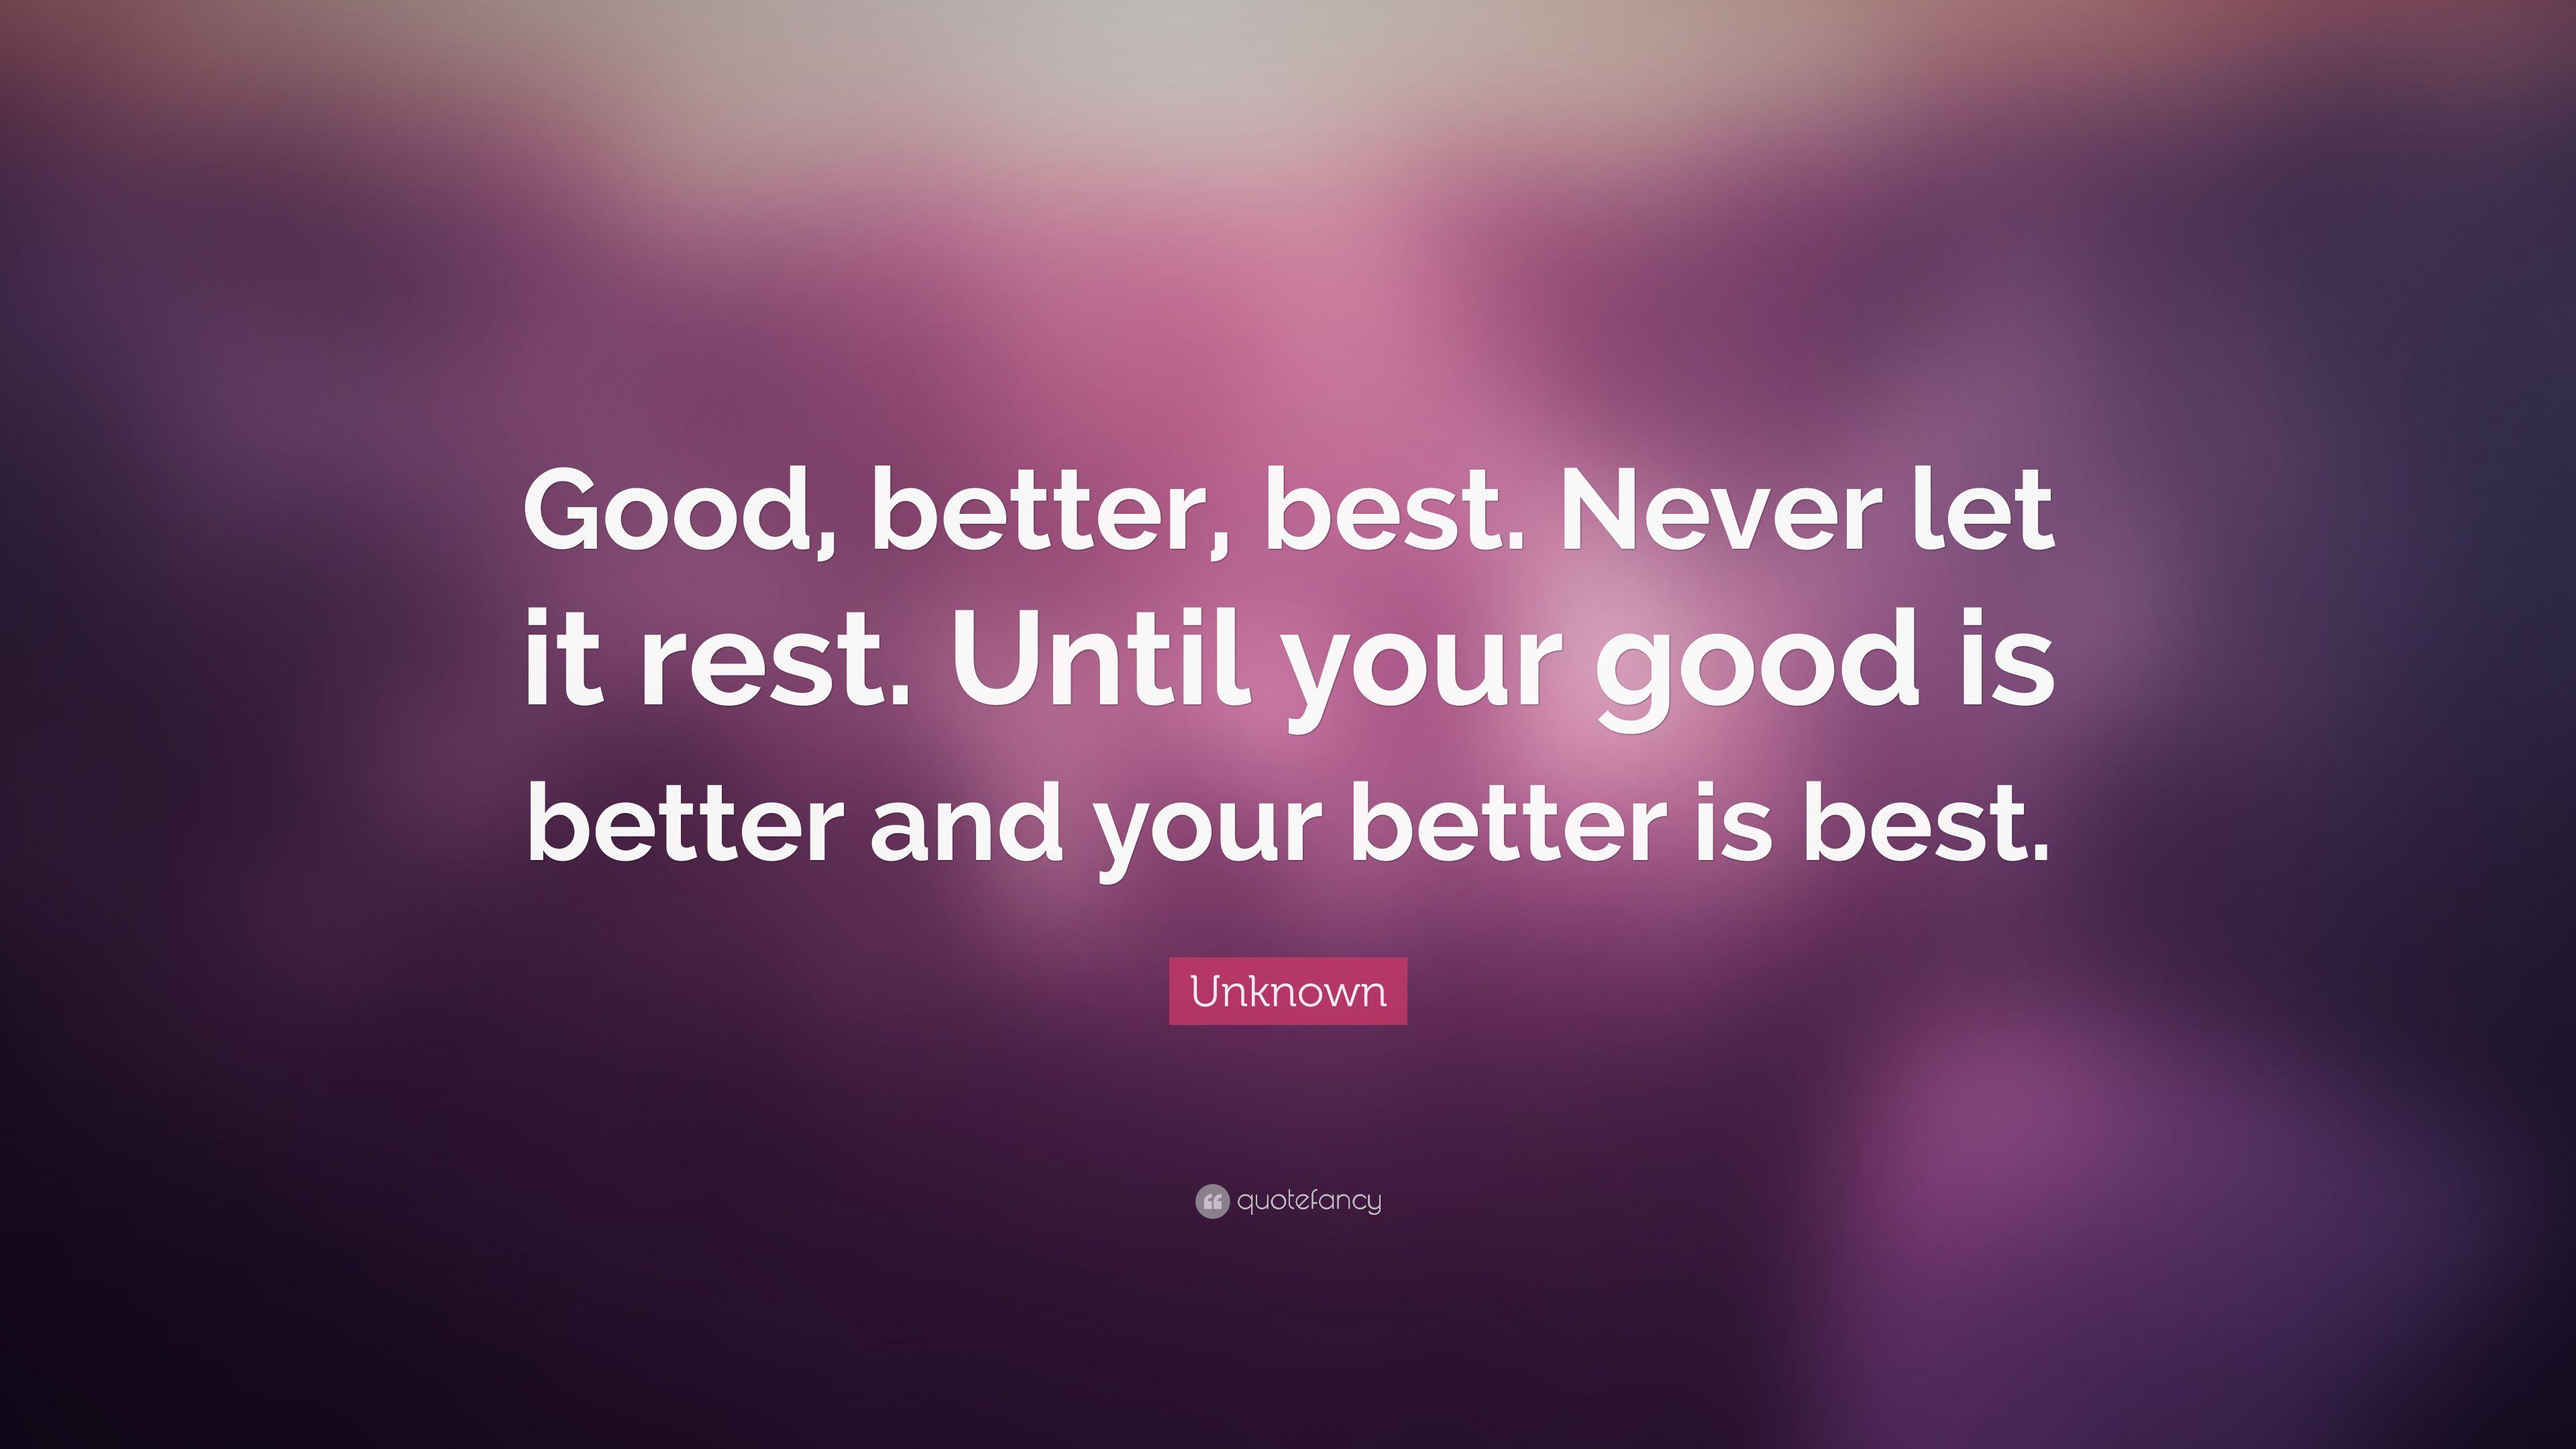 Unknown Quote: “Good, better, best. Never let it rest. Until your